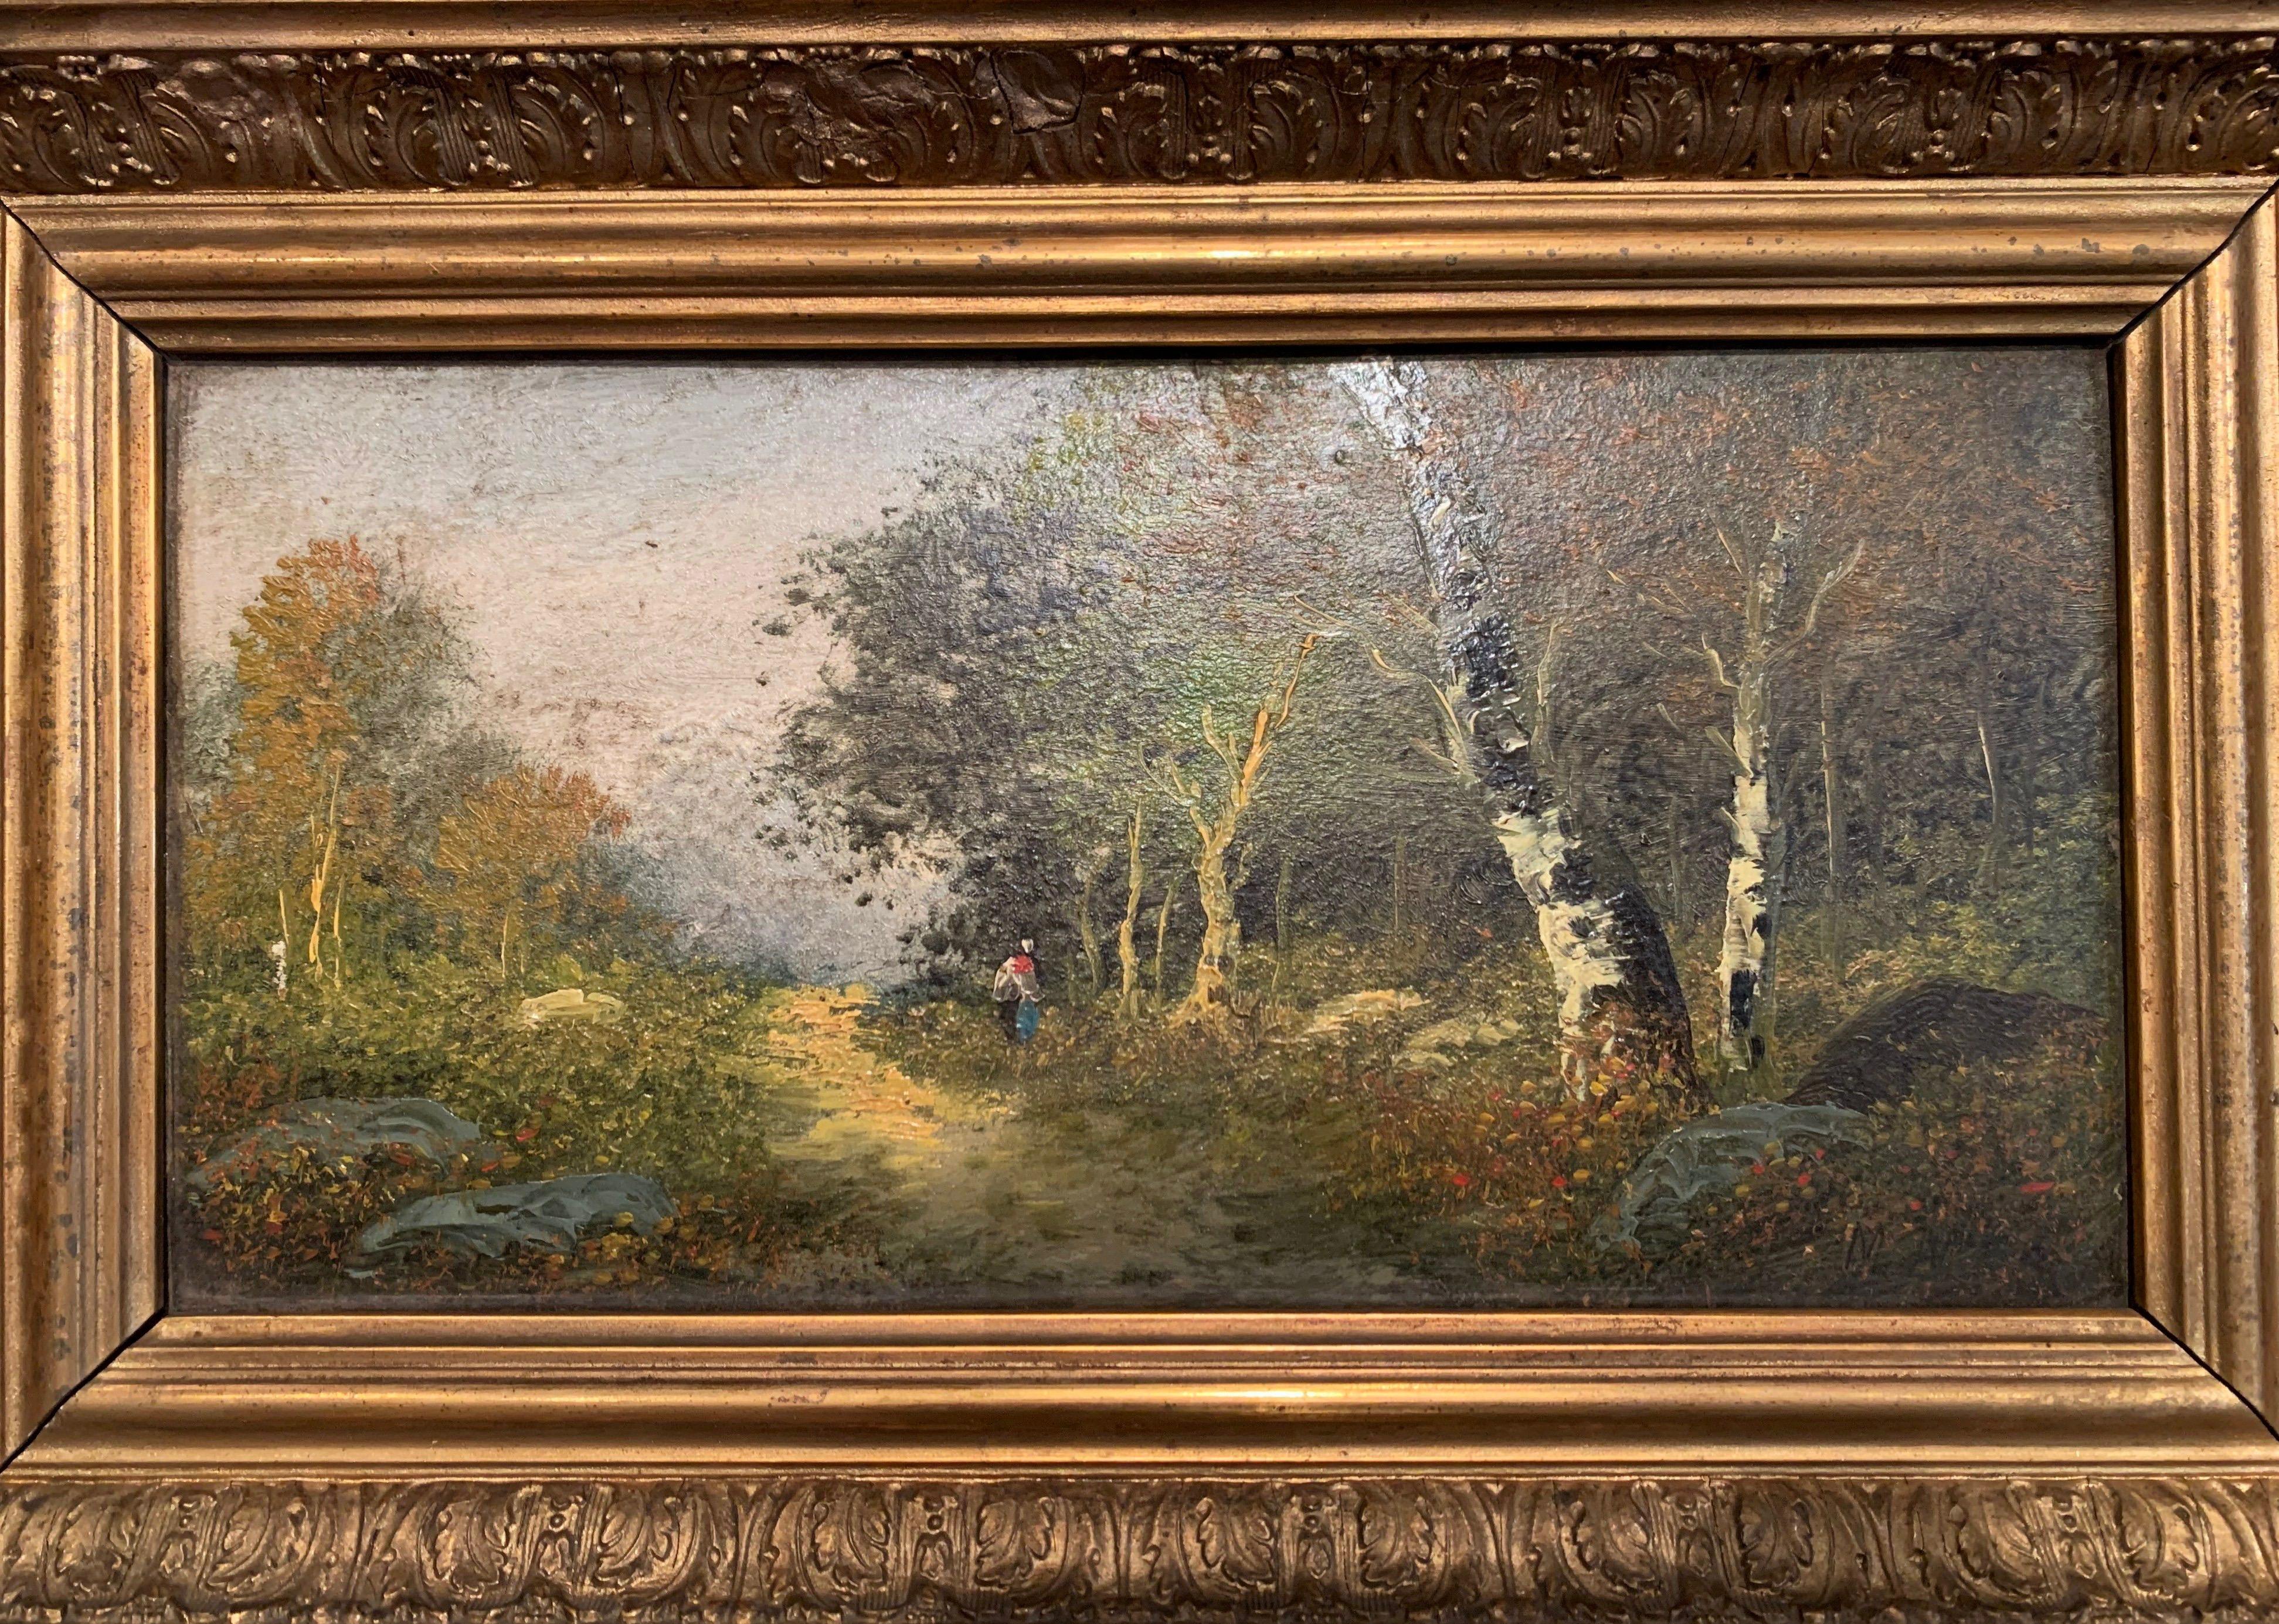 Canvas Pair of 19th Century French Landscape Paintings in Gilt Frames Signed M. Max